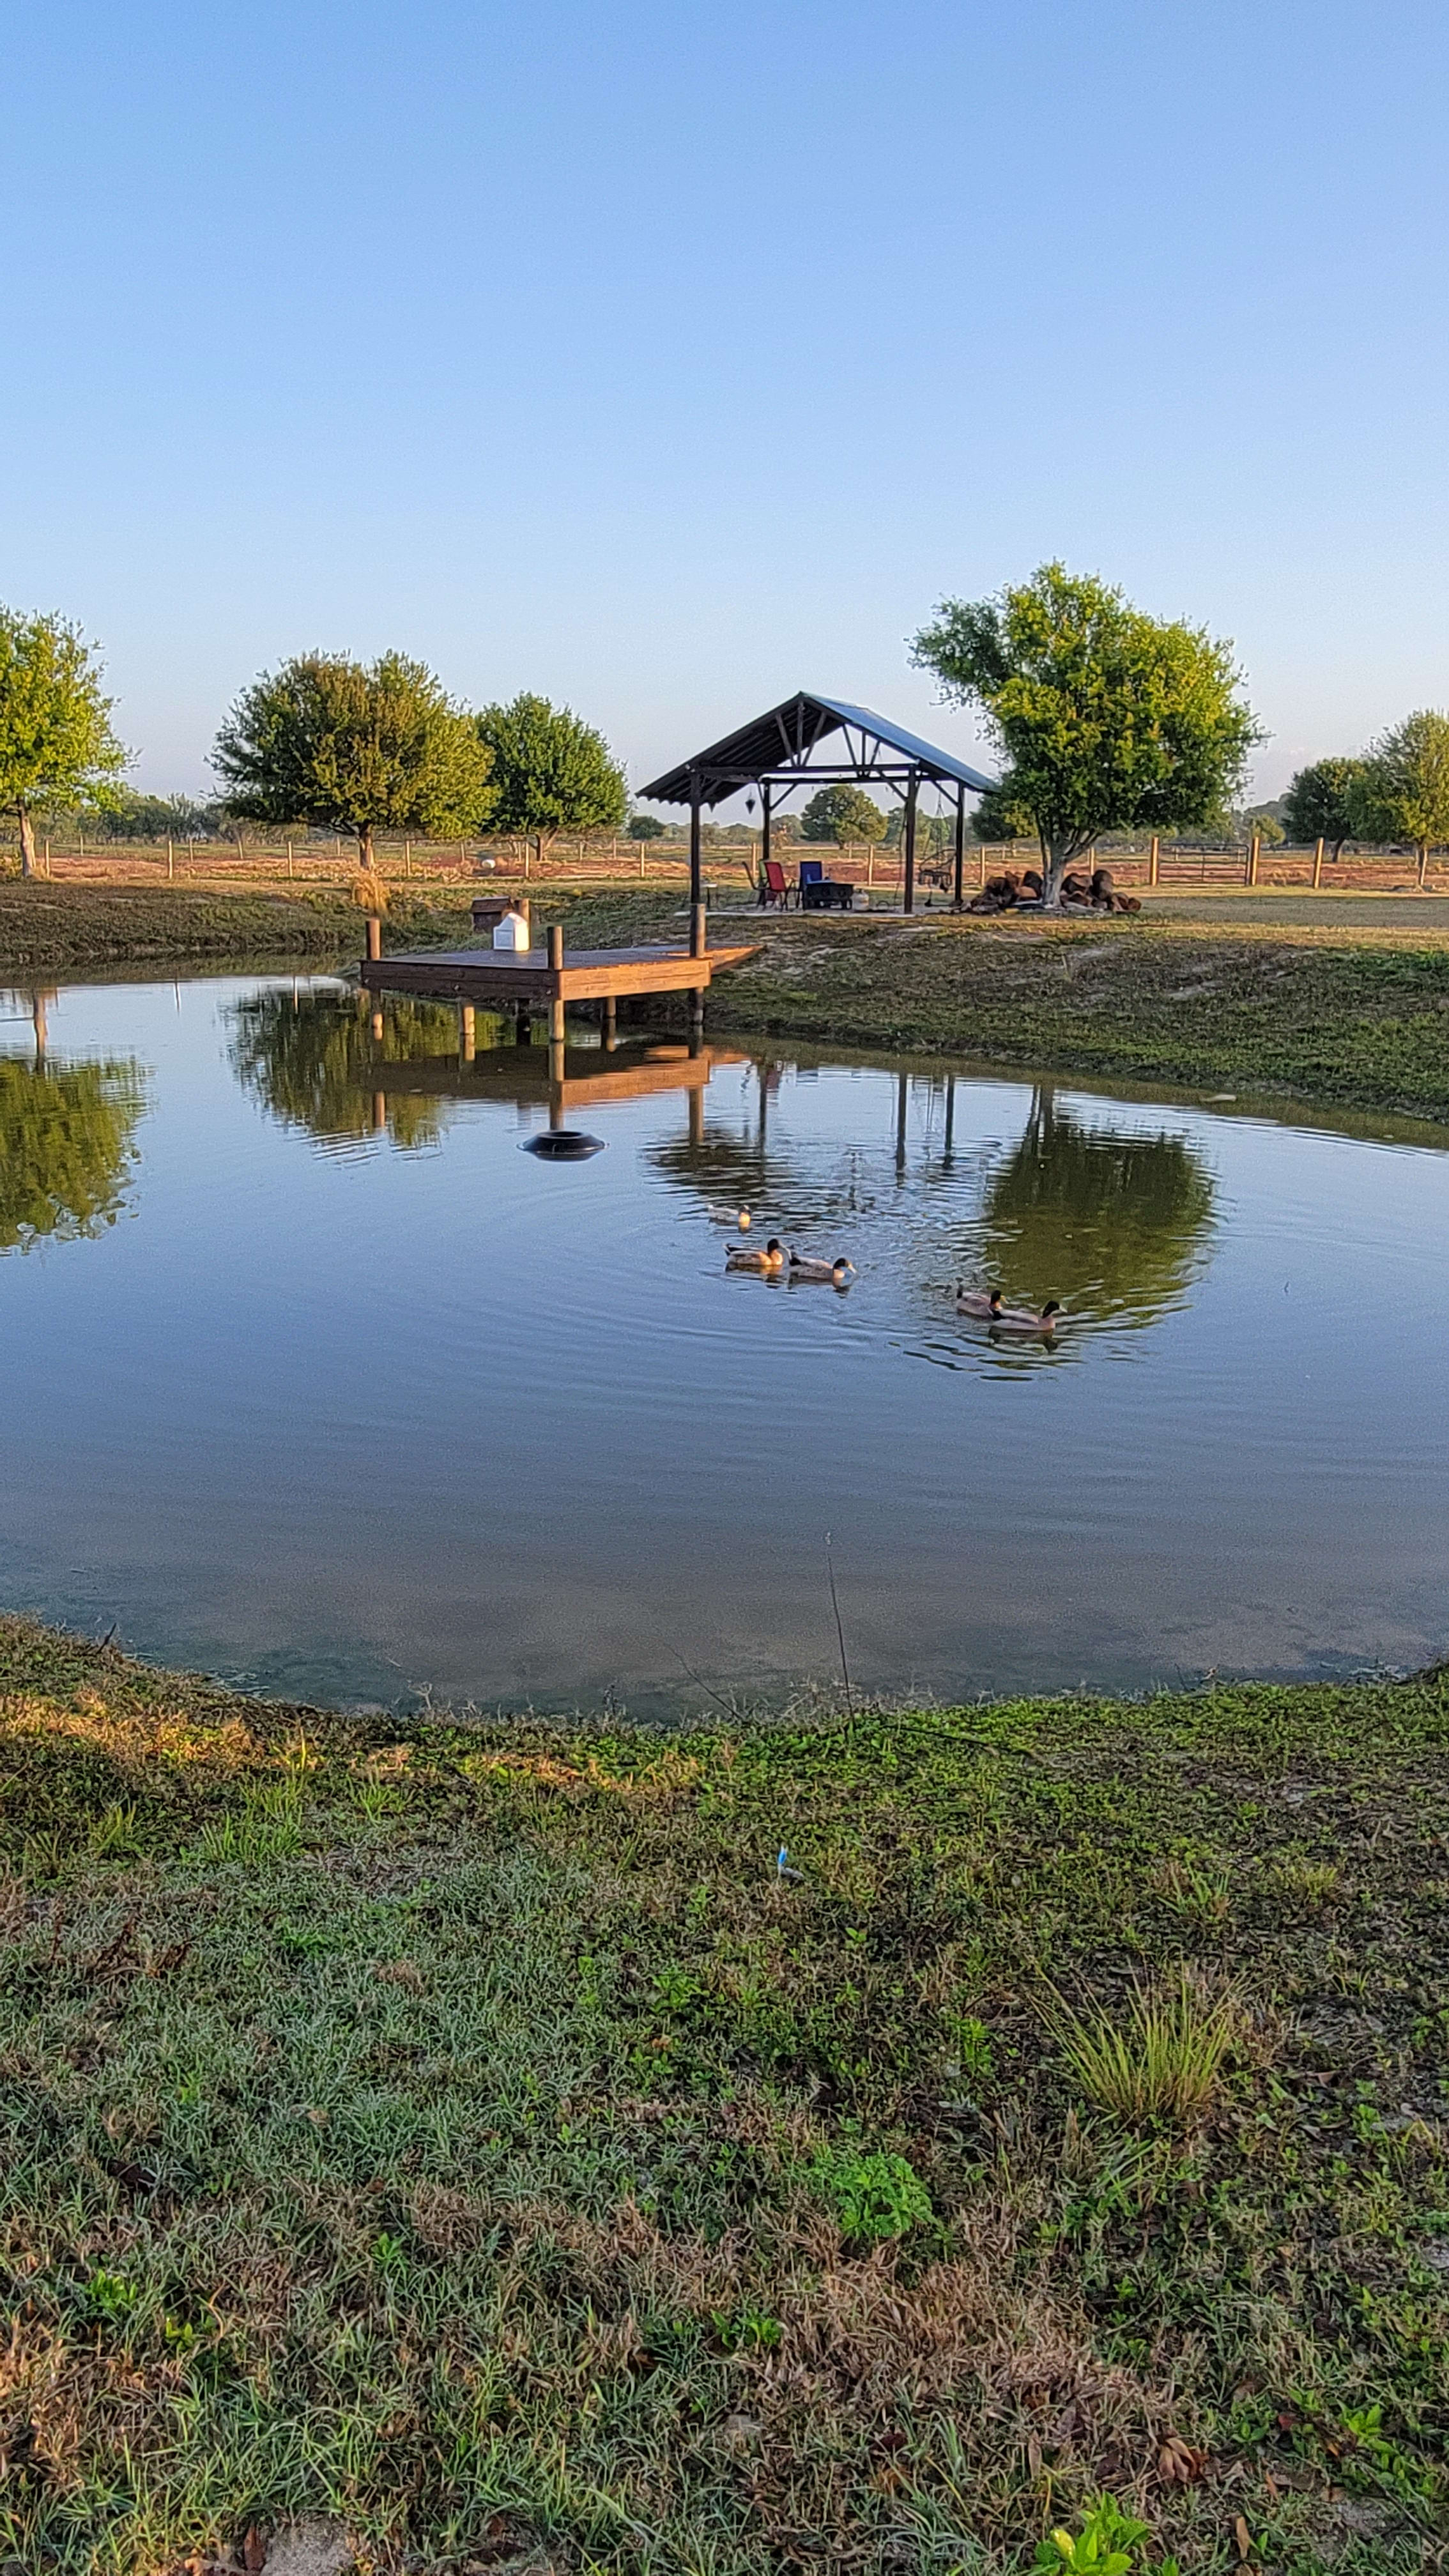 Enjoy our fire pit, dock, and ducks! 